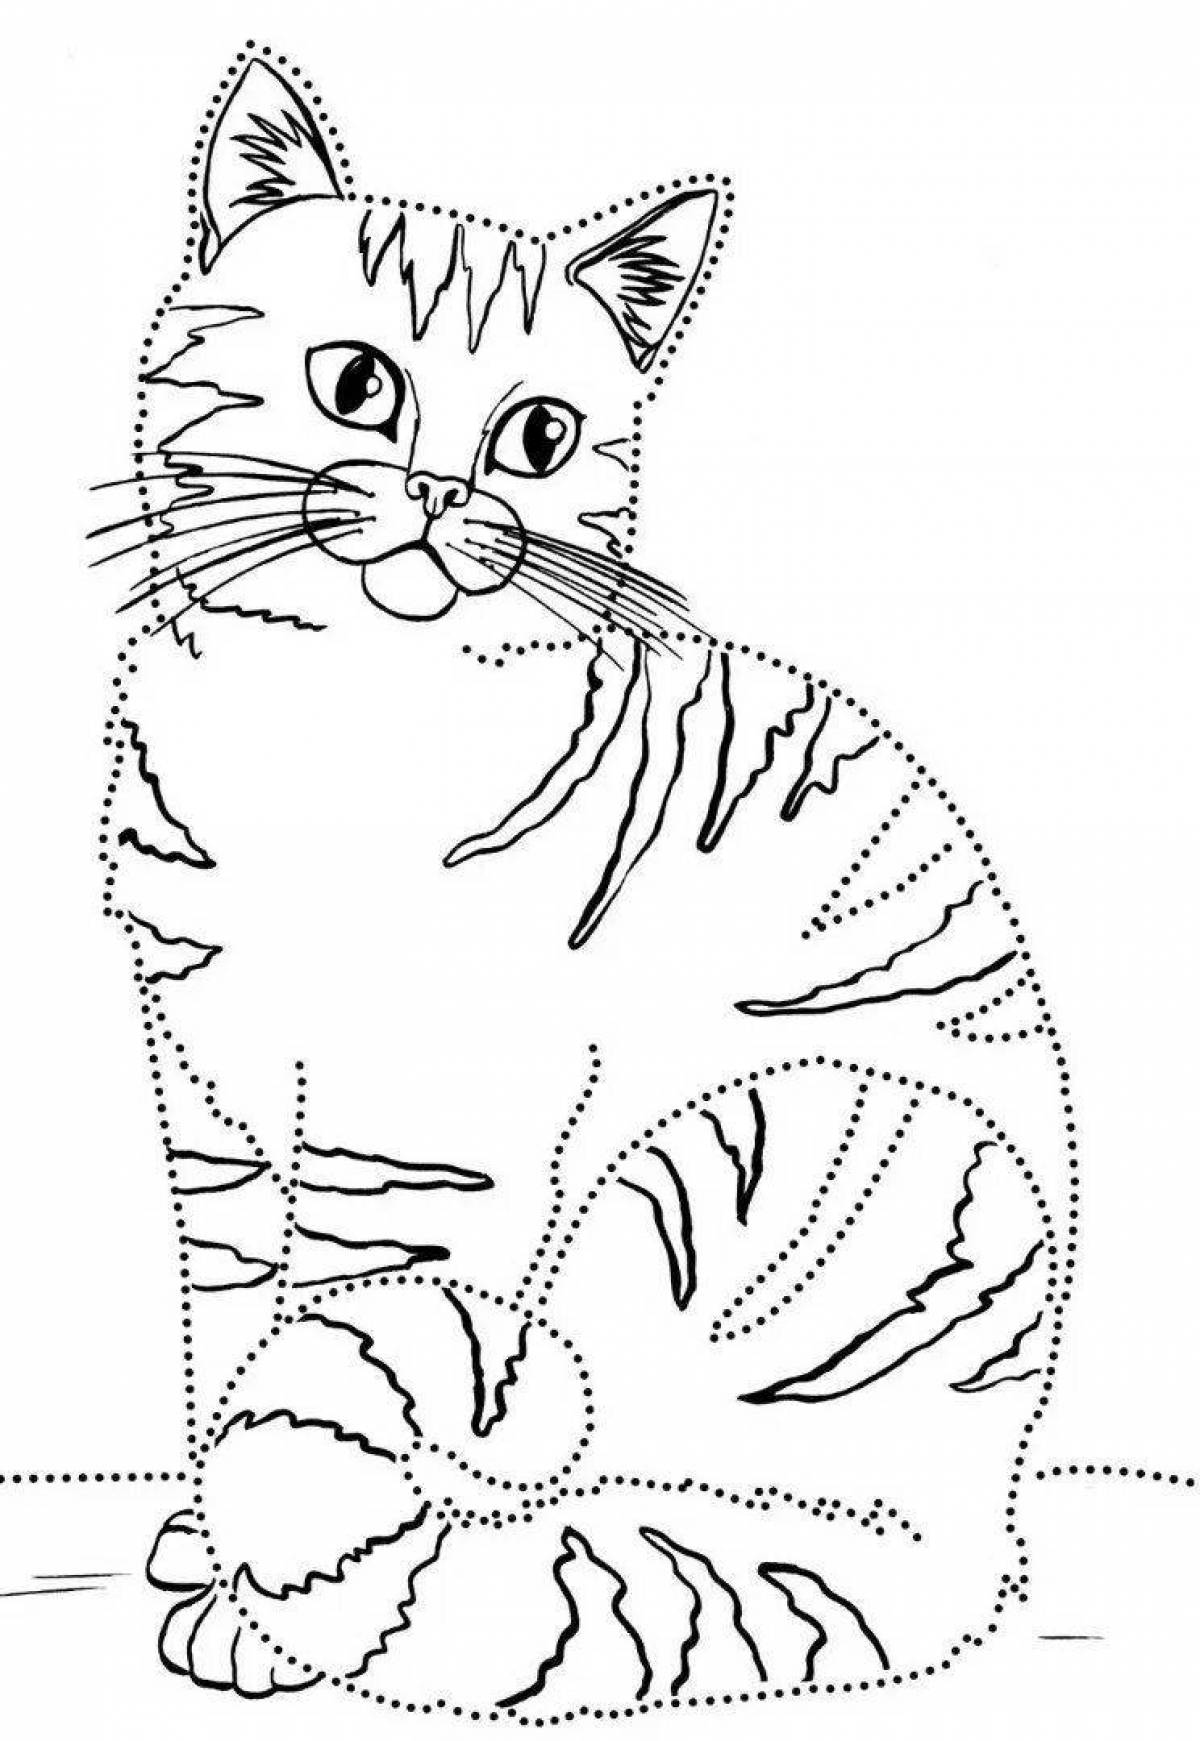 Fun coloring for children 5-6 years old with cats